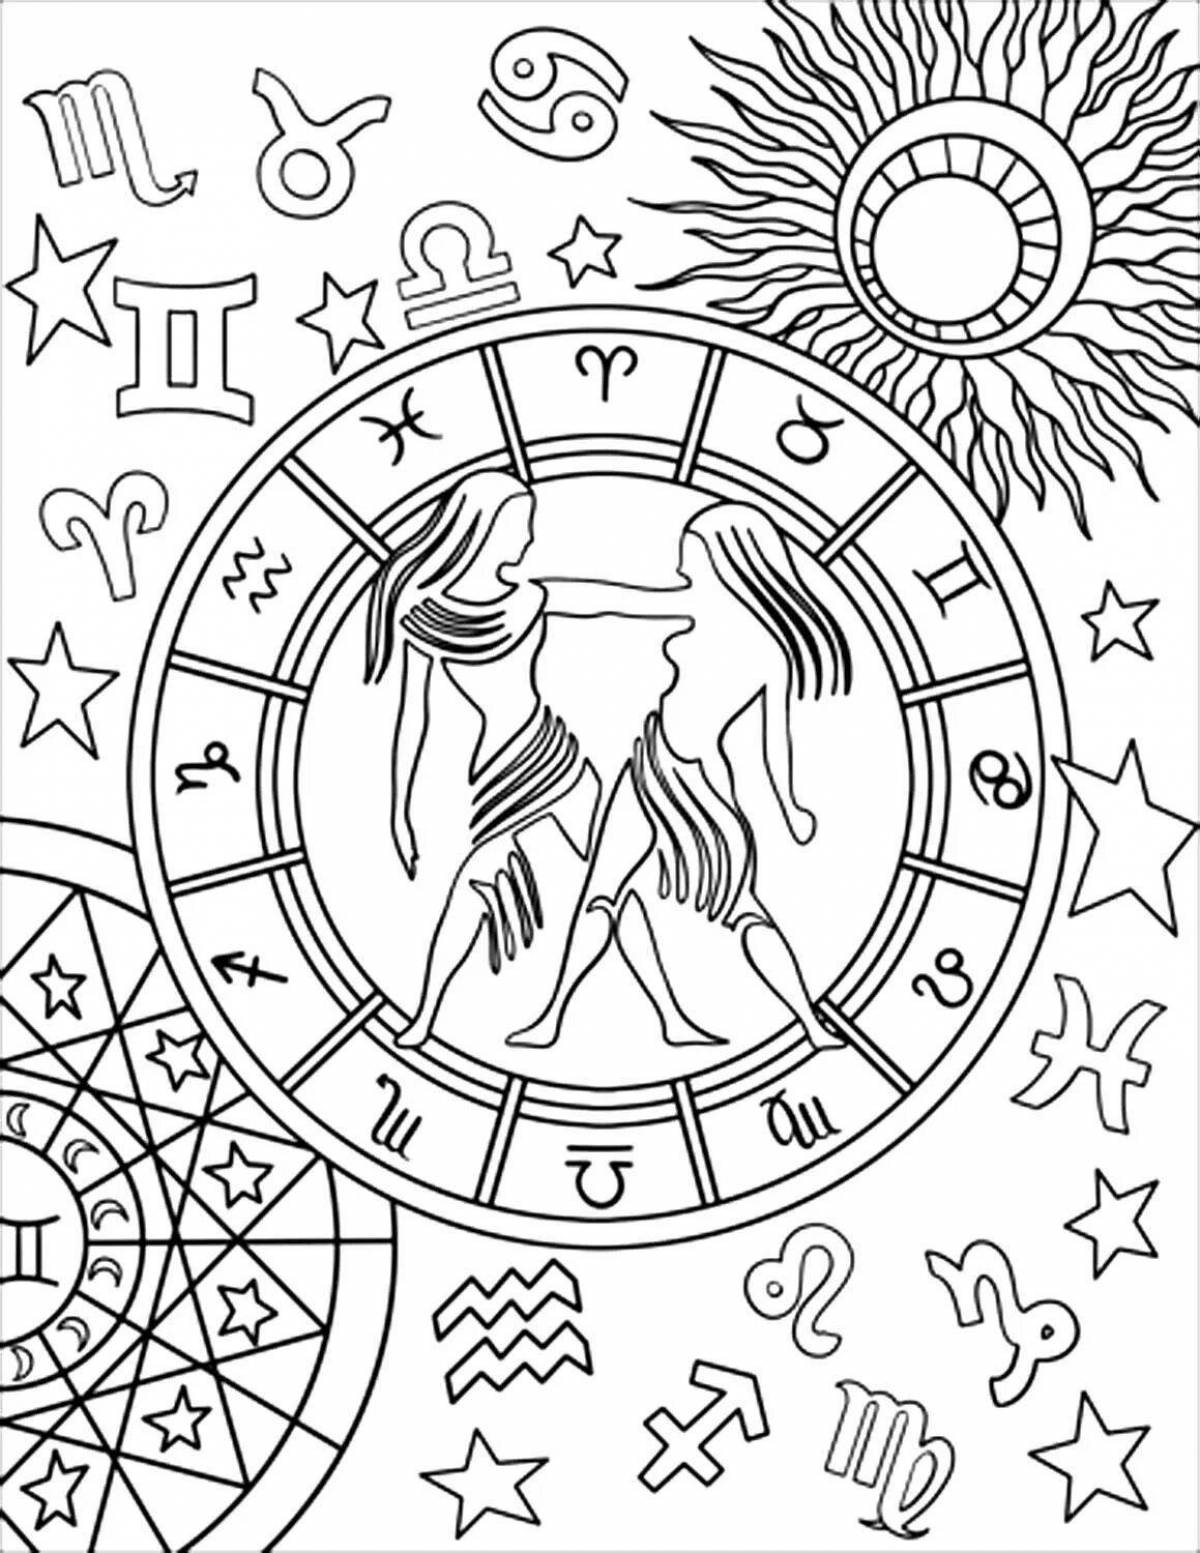 Colorful zodiac signs coloring pages for kids to have fun